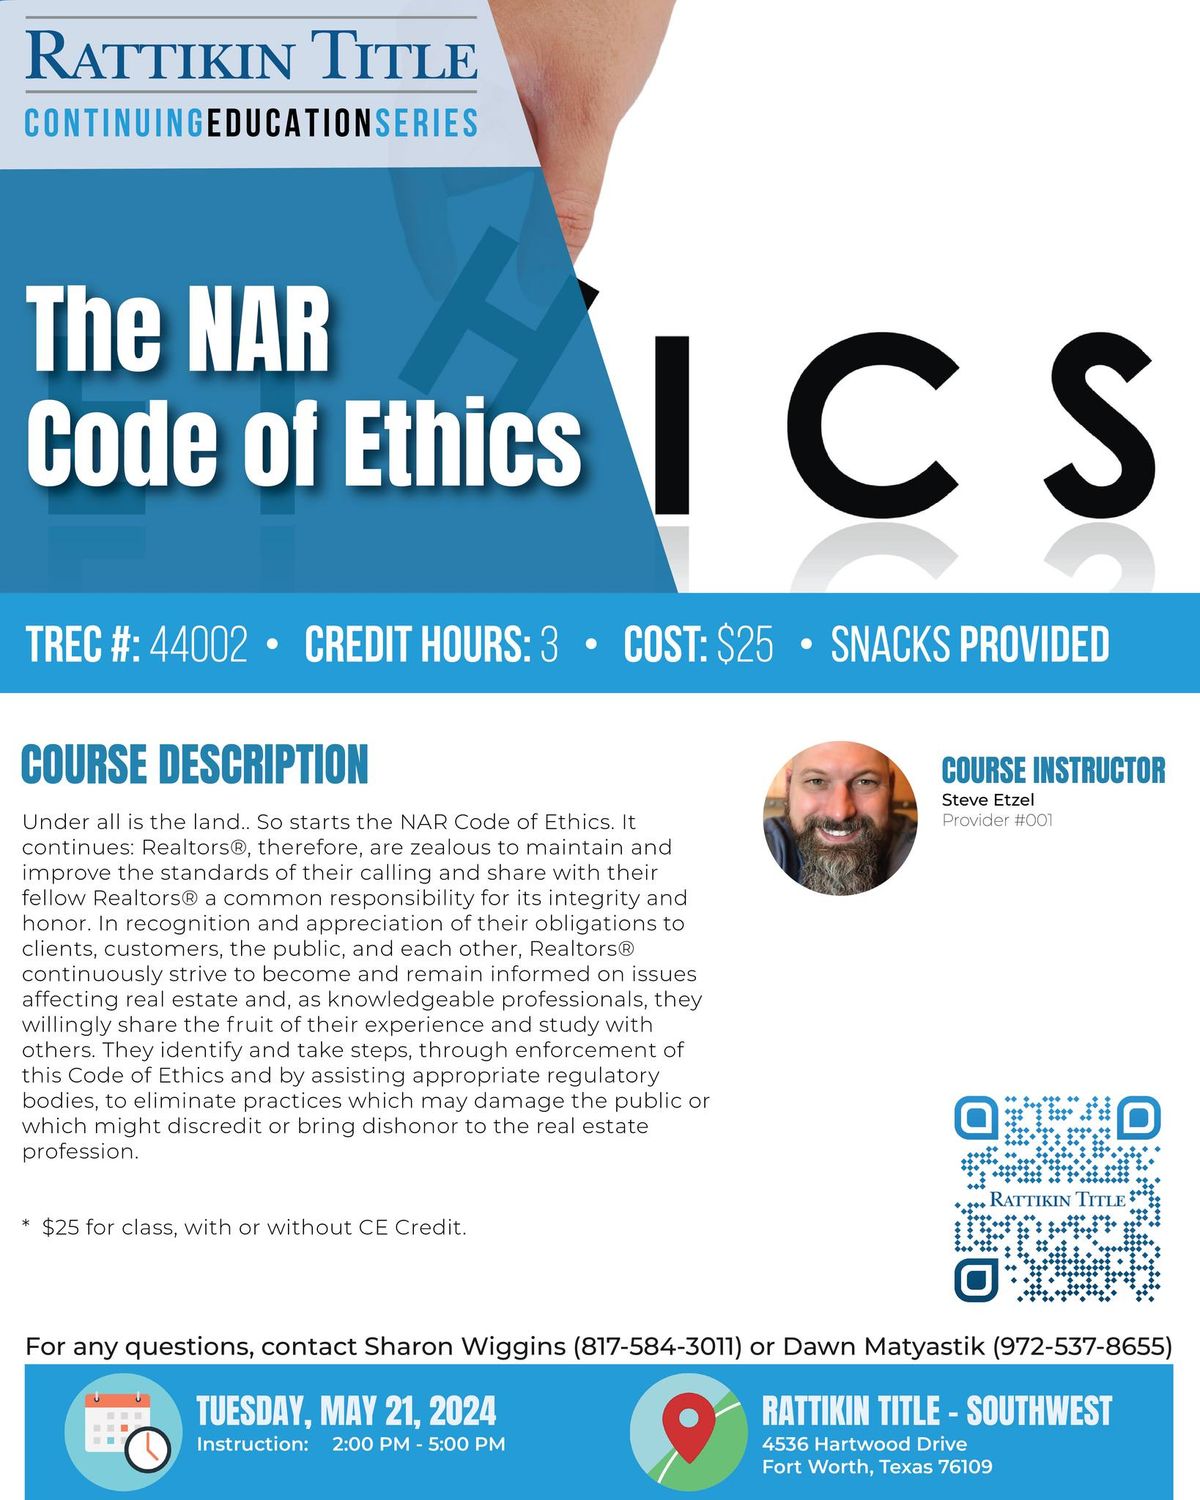 The NAR Code of Ethics